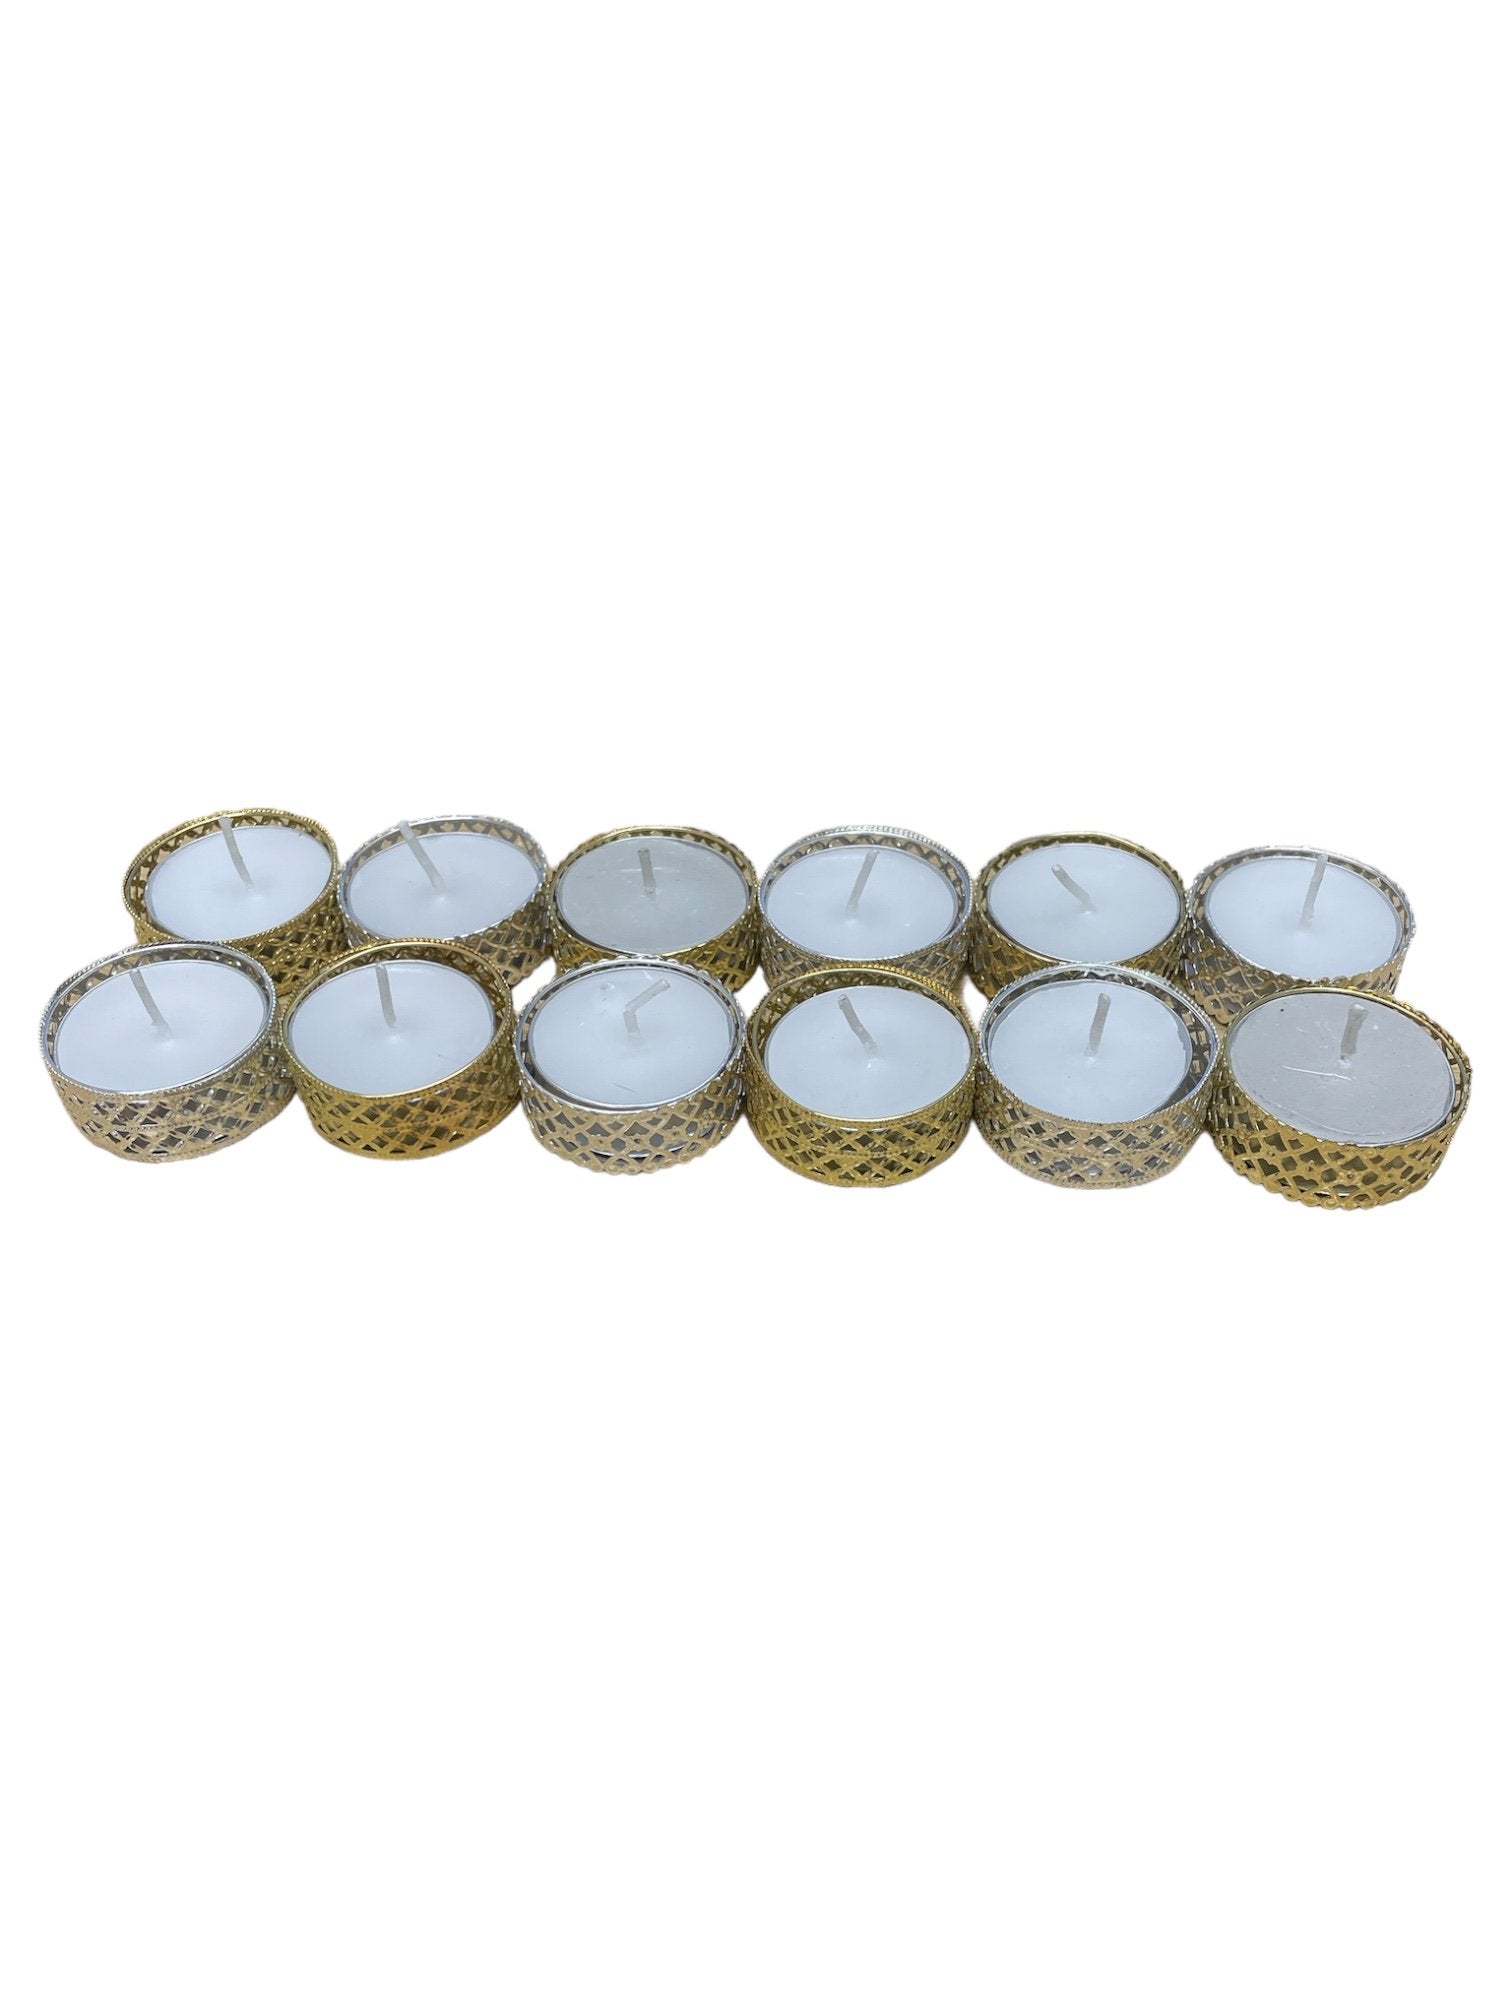 View Silver and Gold Heart Pattern Tea Light Candles Pack of 12 information